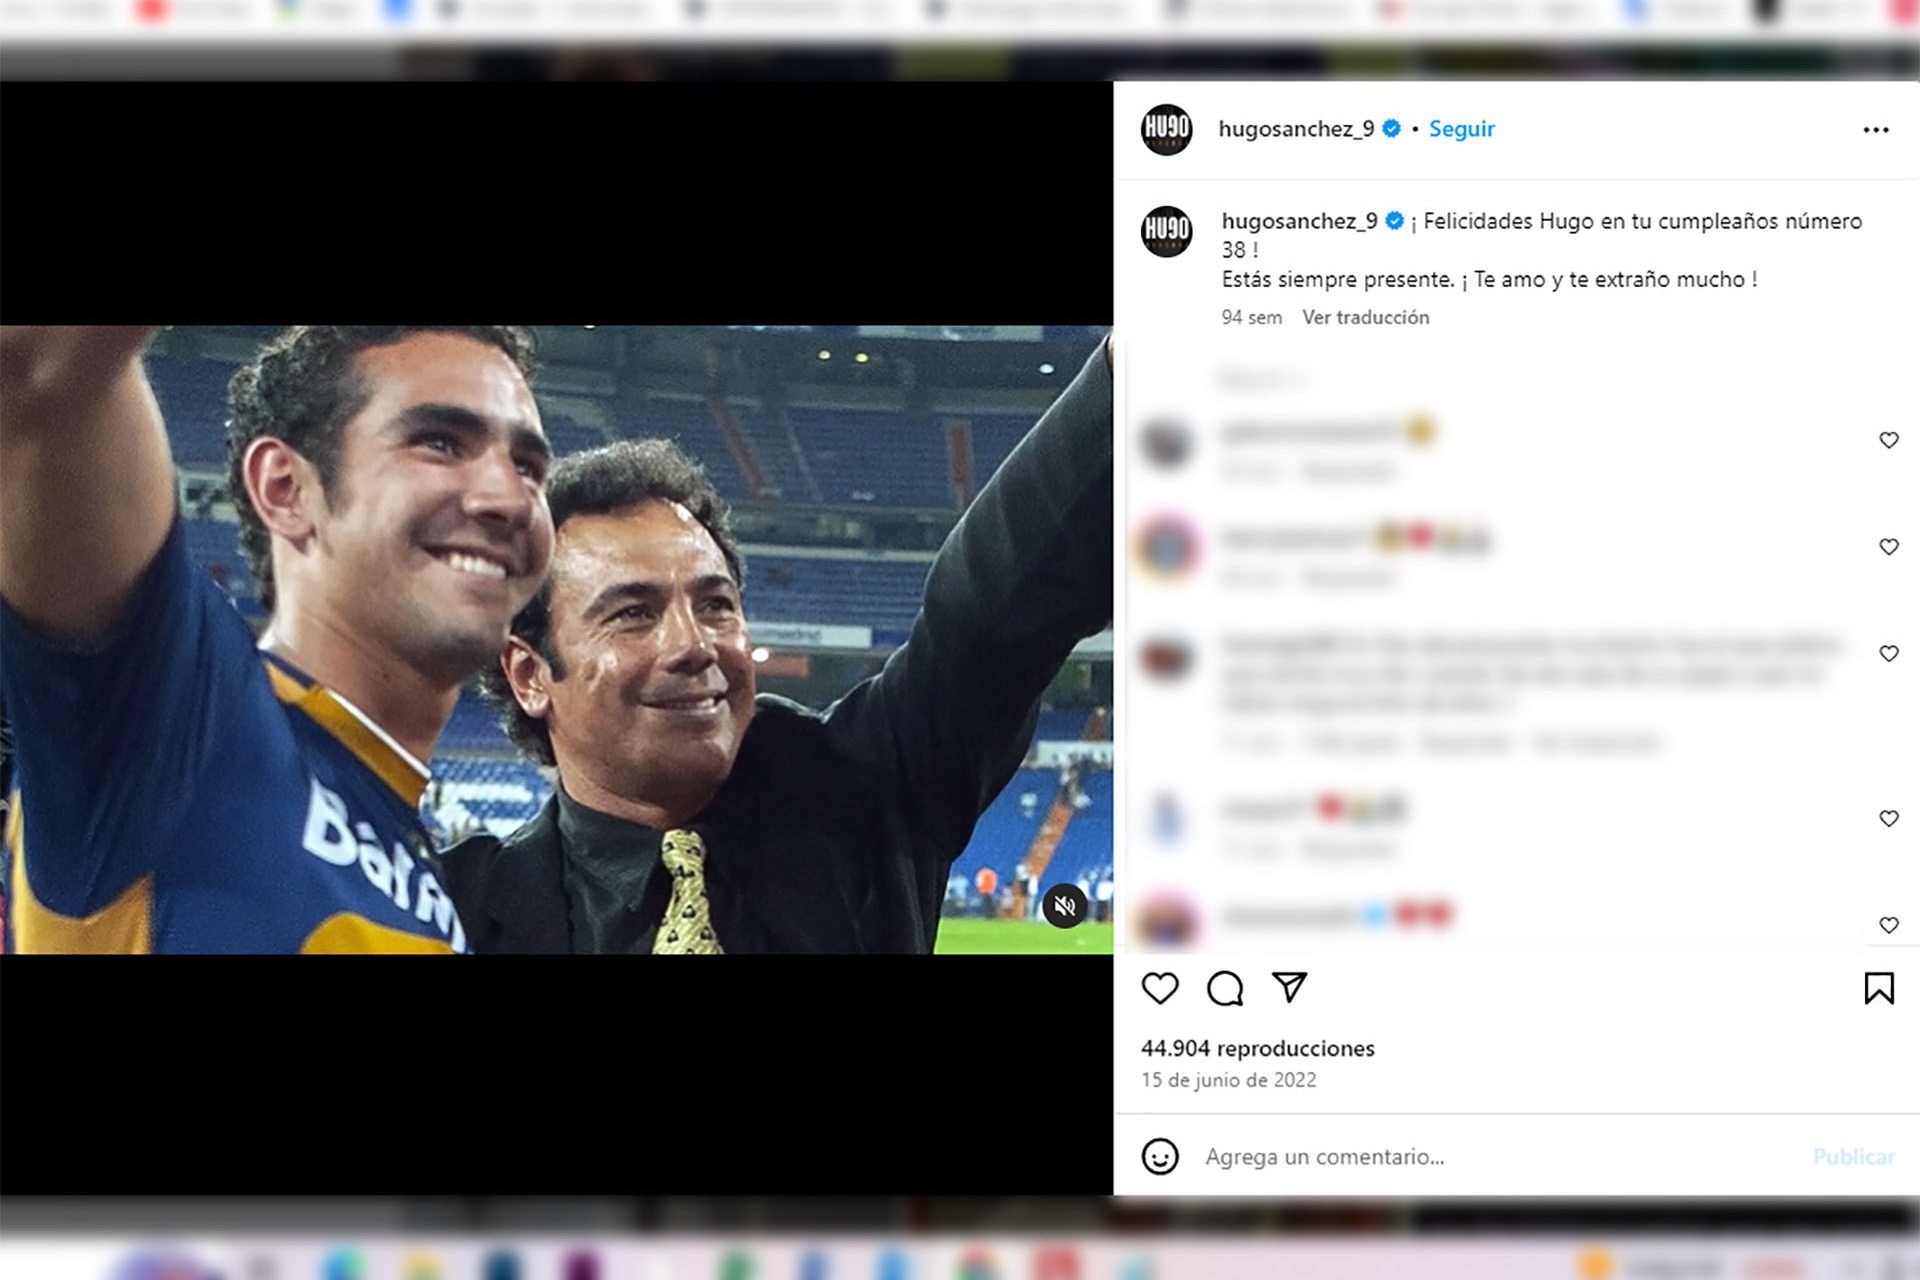 <p>Ultimately, amidst the trials and tribulations, the rift between them would fade into the recesses of memory. Each passing year, Hugo Sánchez Sr. ensures that his son remains ever-present in his heart and mind.</p> <p>Image: Official Instagram of Hugo Sánchez (@hugosanchez_9)</p>